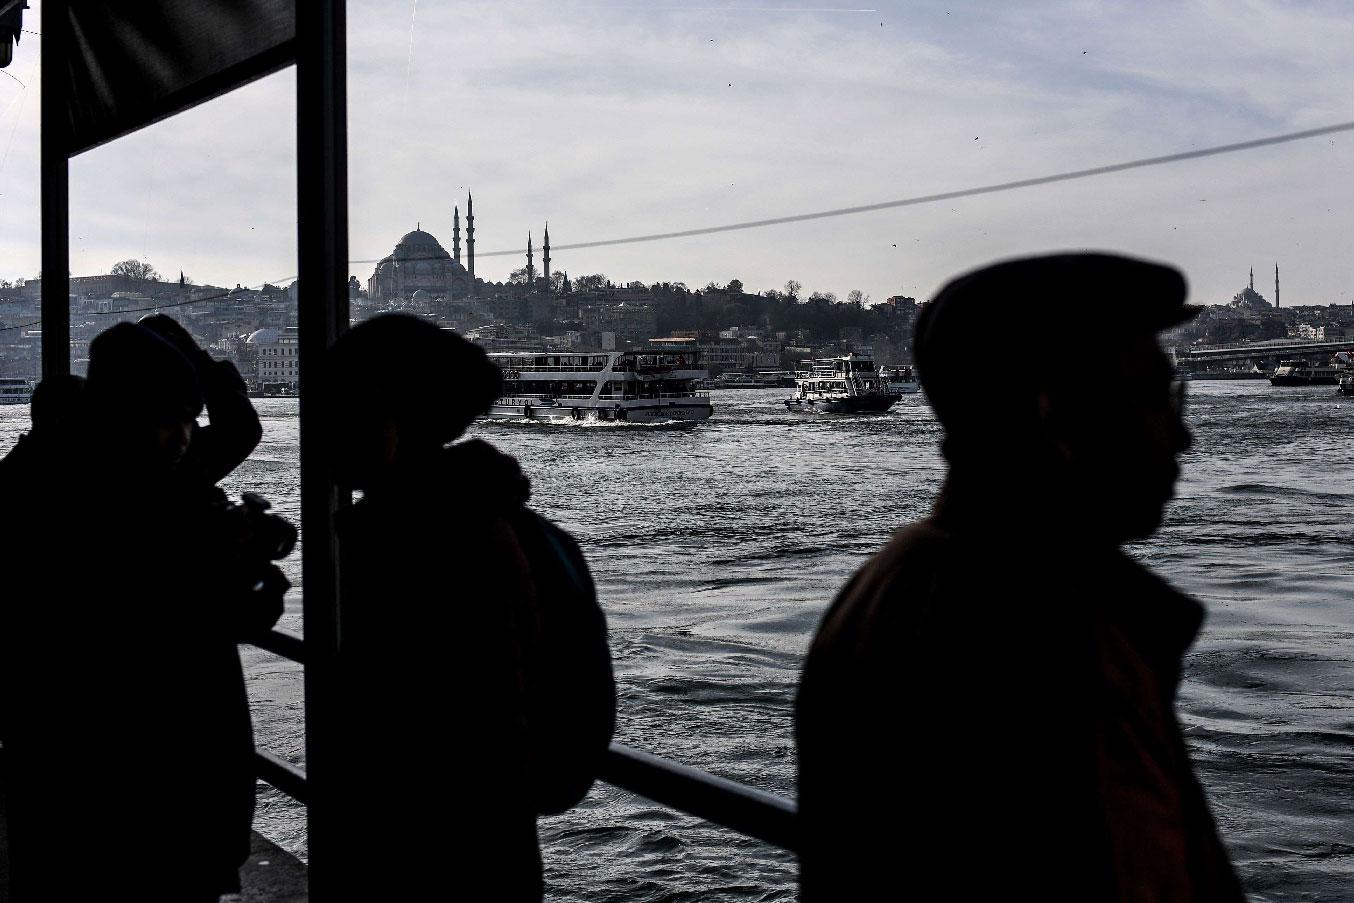 People stand on Galata bridge in Istanbul as Suleymaniye mosque is seen in the background